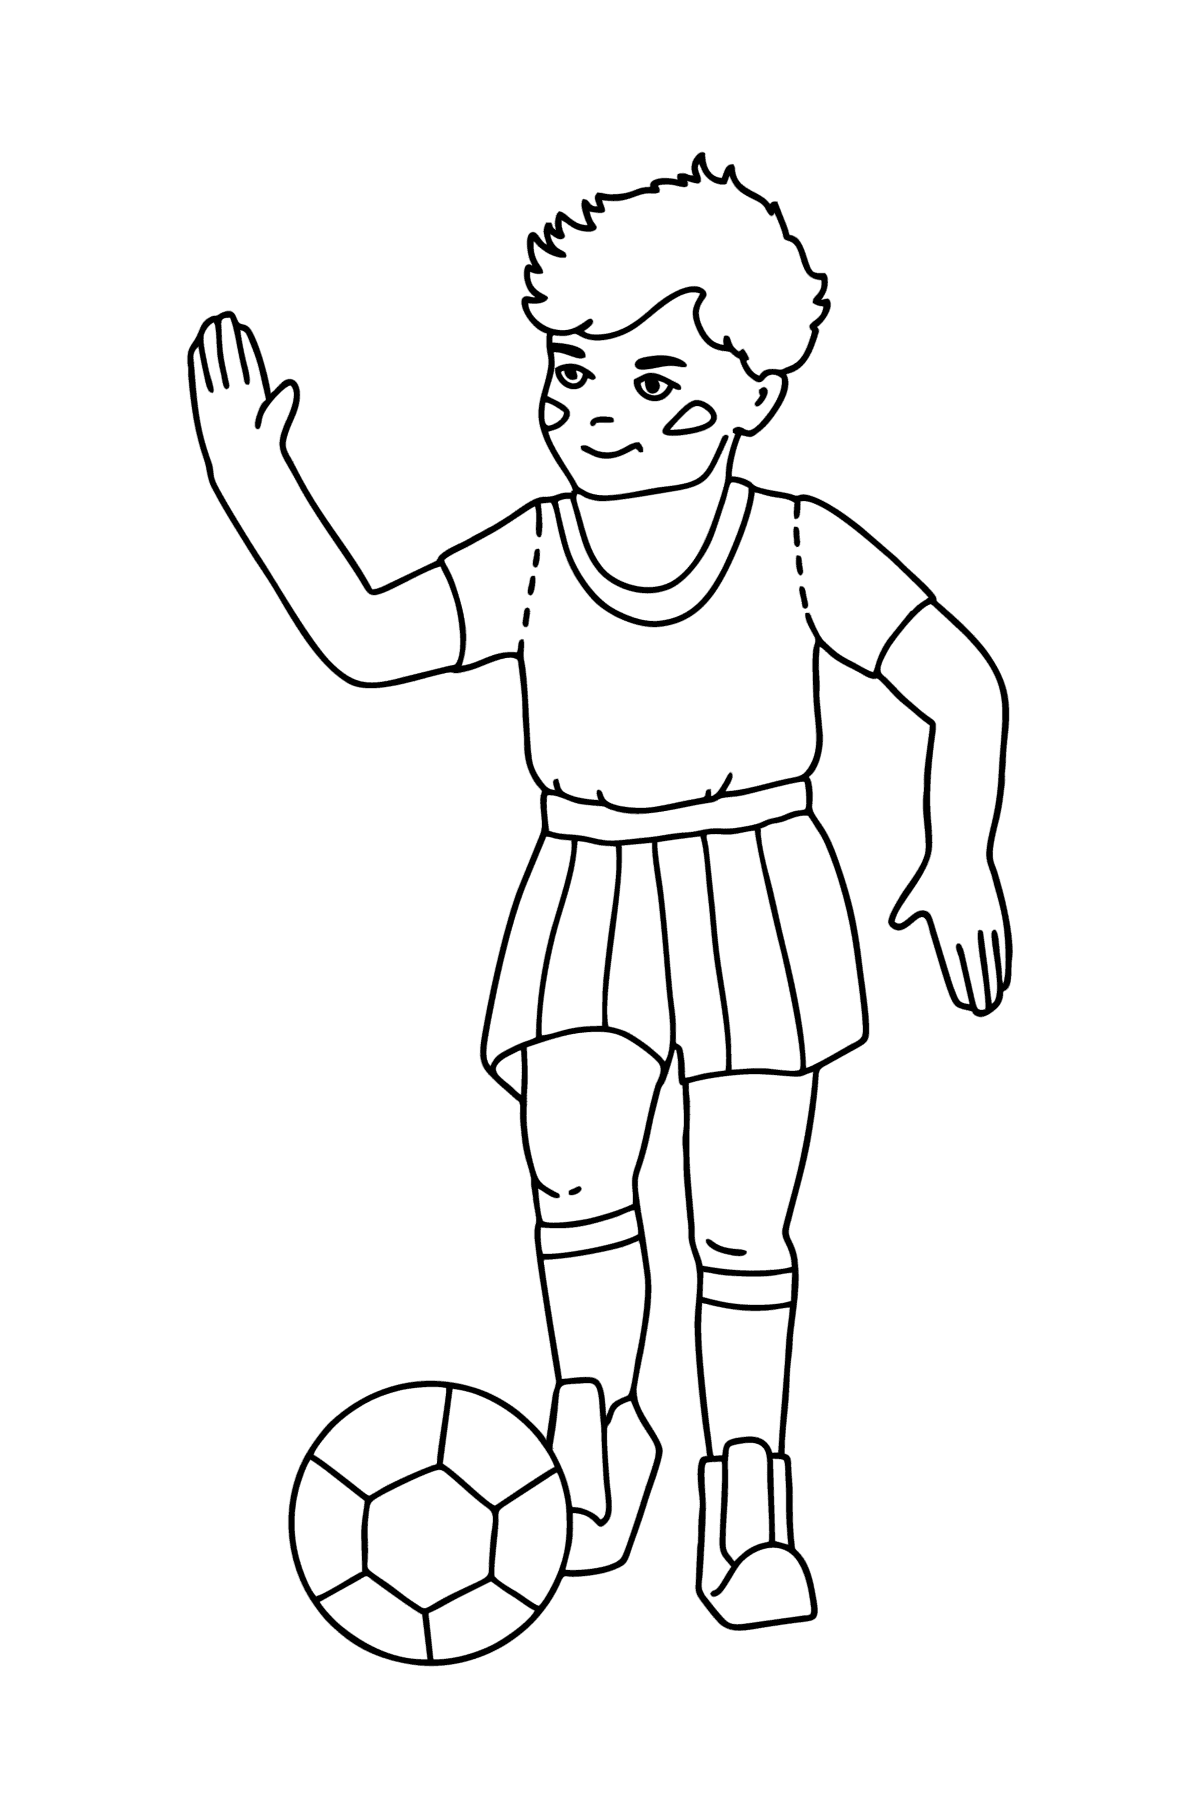 Boy soccer player сoloring page - Coloring Pages for Kids